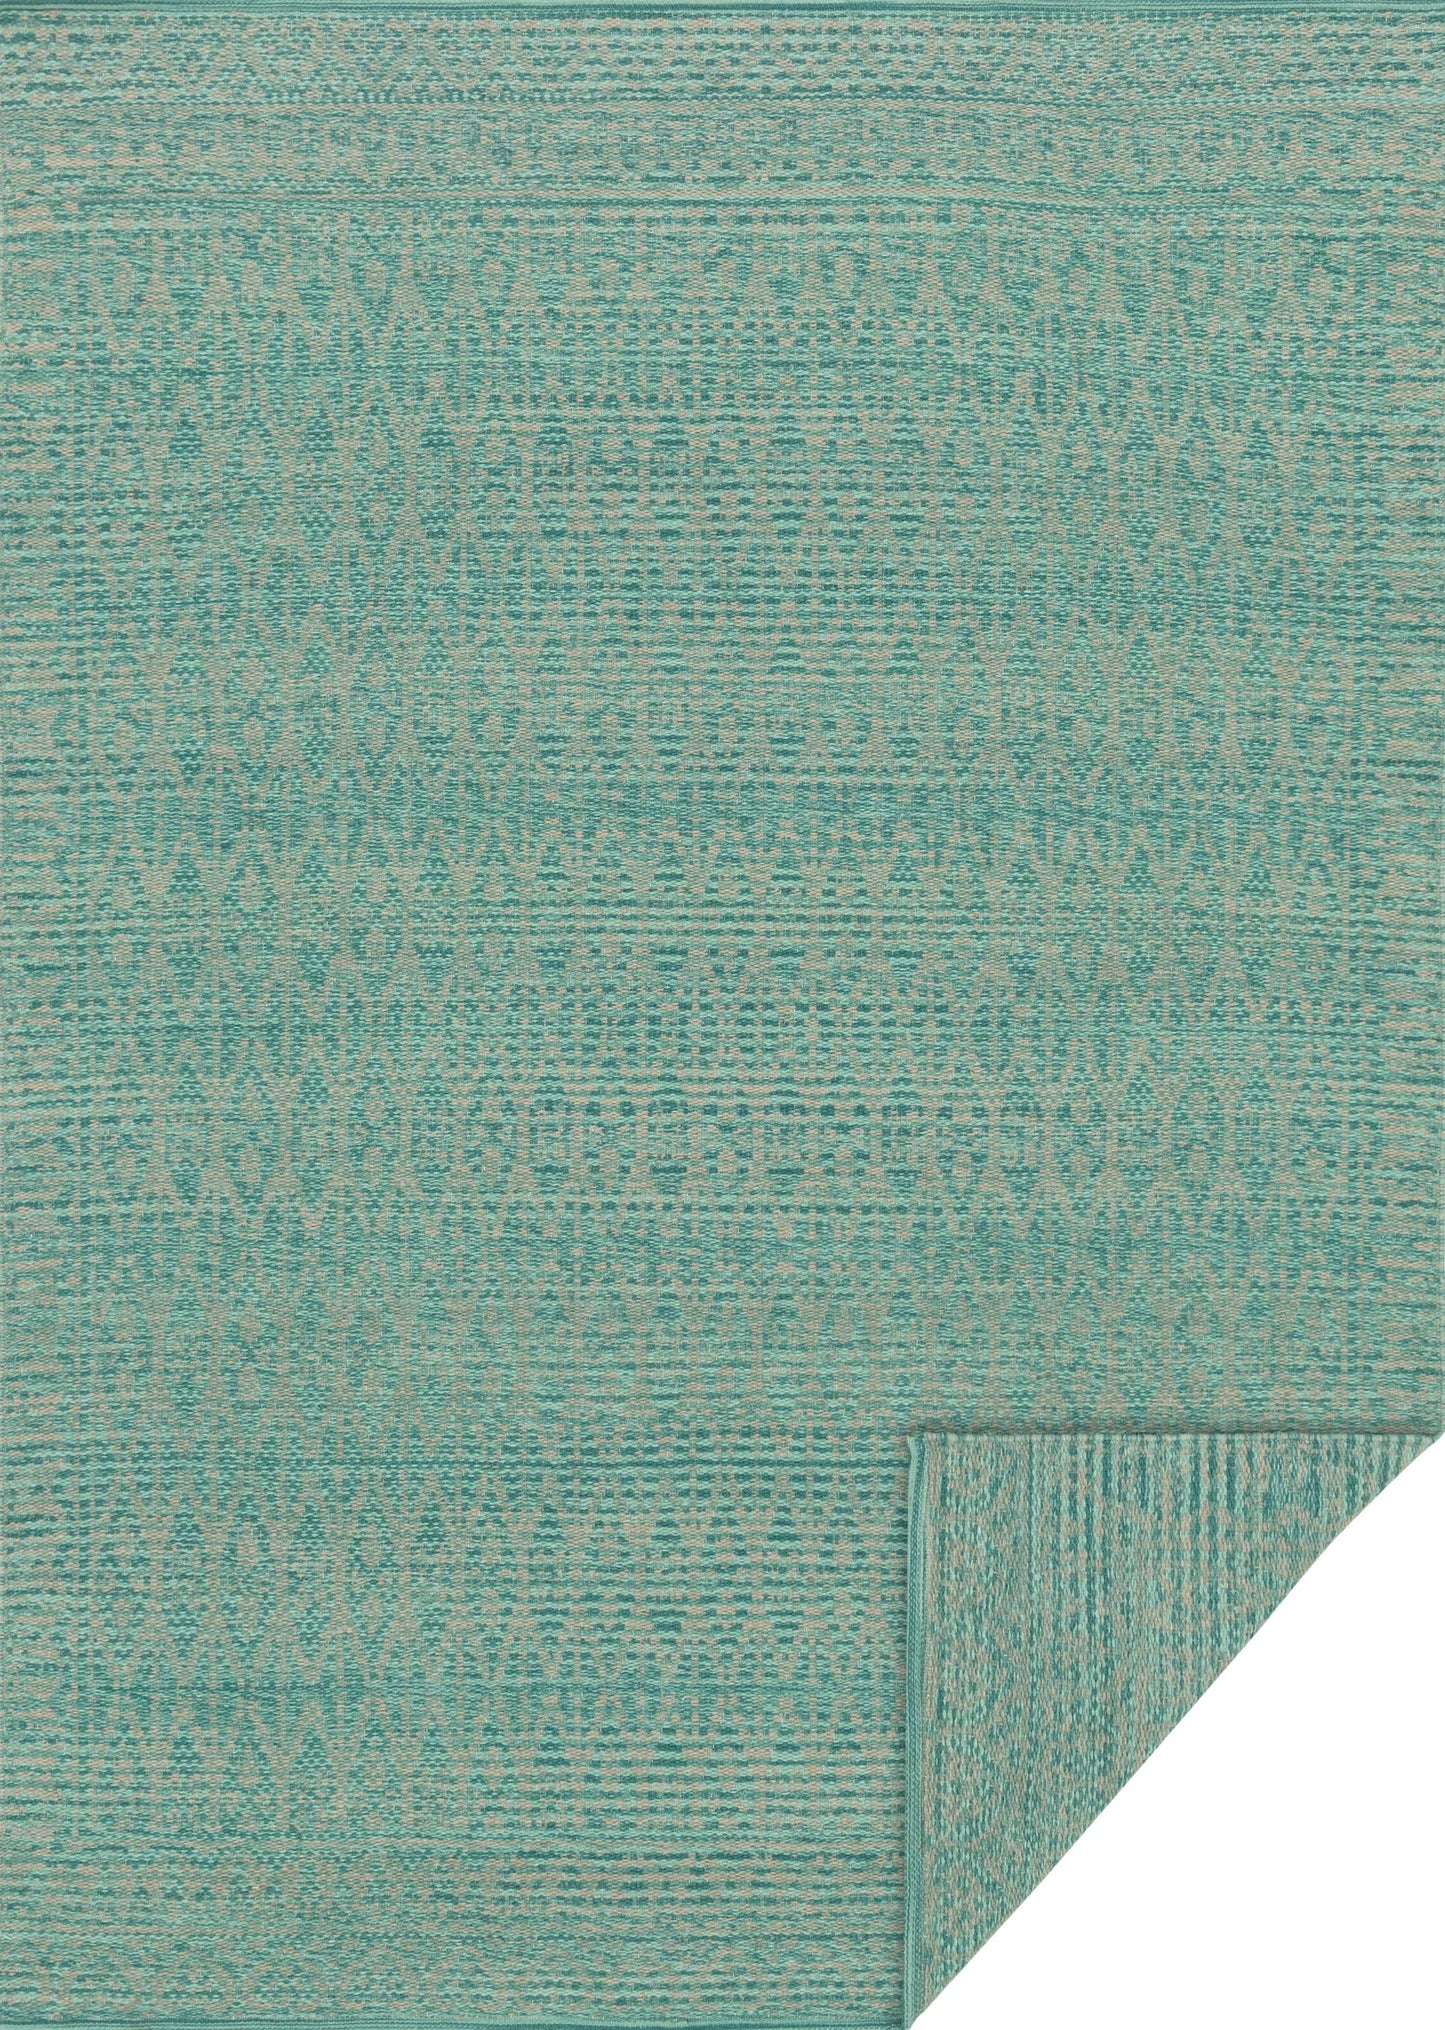 Emmie Kay ED Wool Indoor Area Rug from Magnolia Home by Joanna Gaines x Loloi